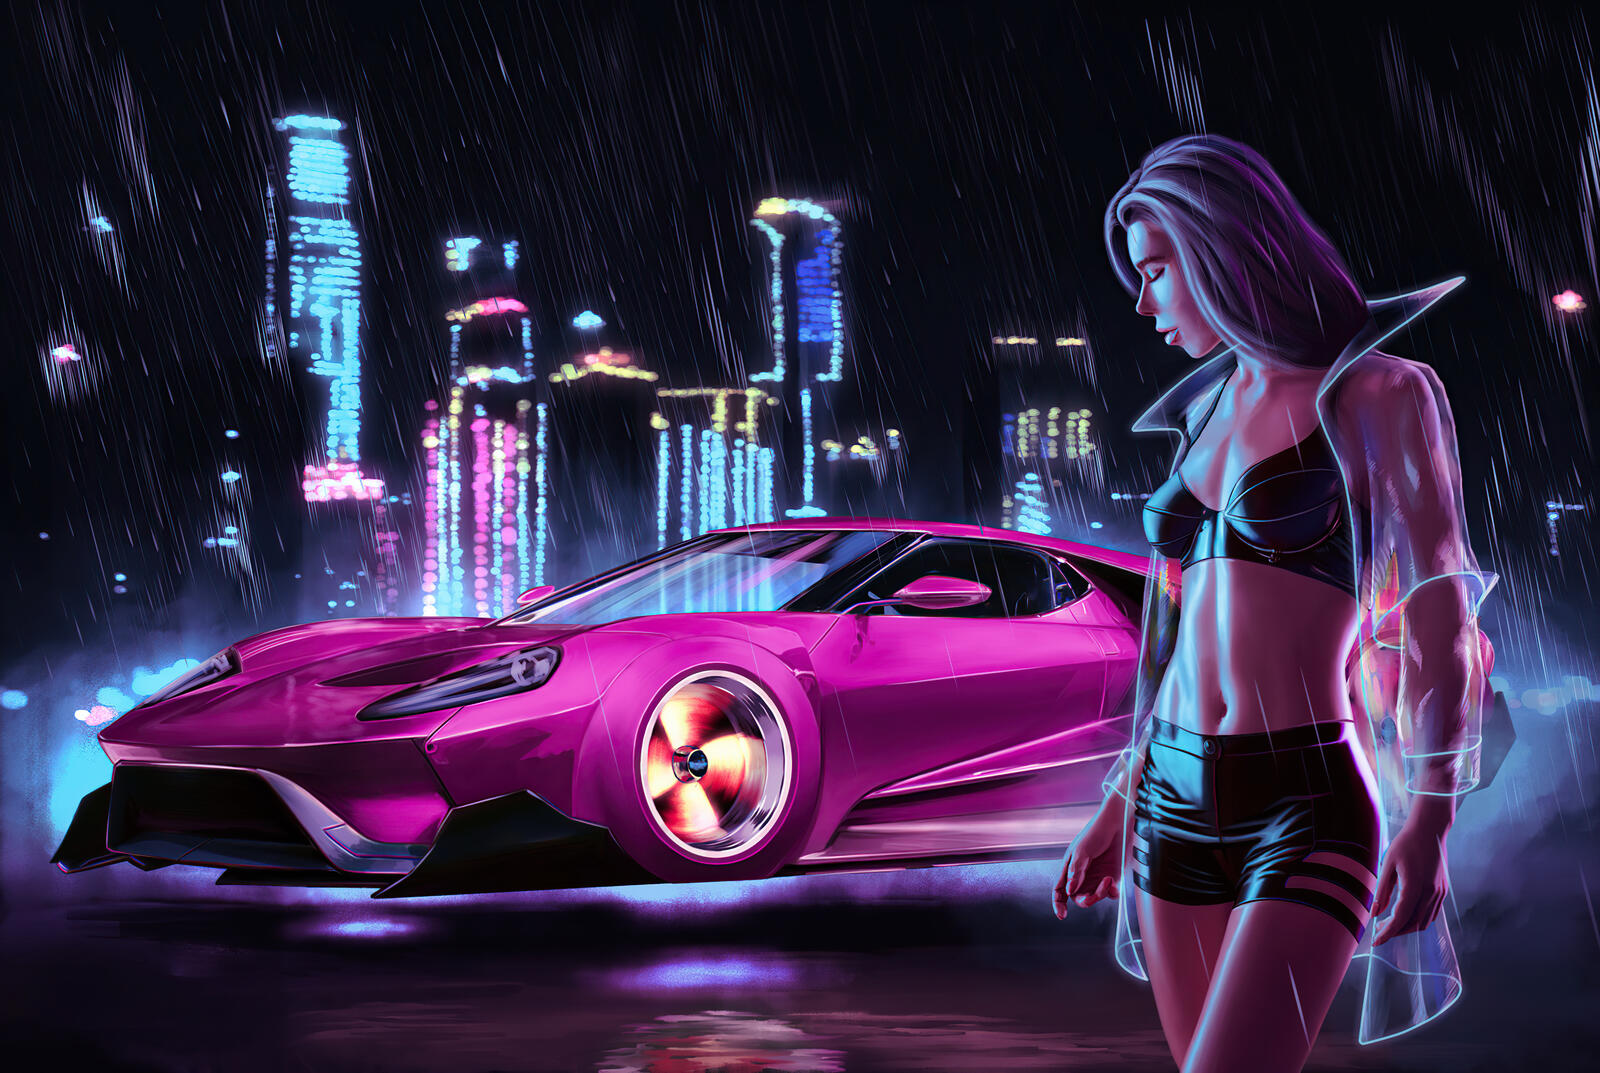 Free photo A cyberpunk girl with a cool car.